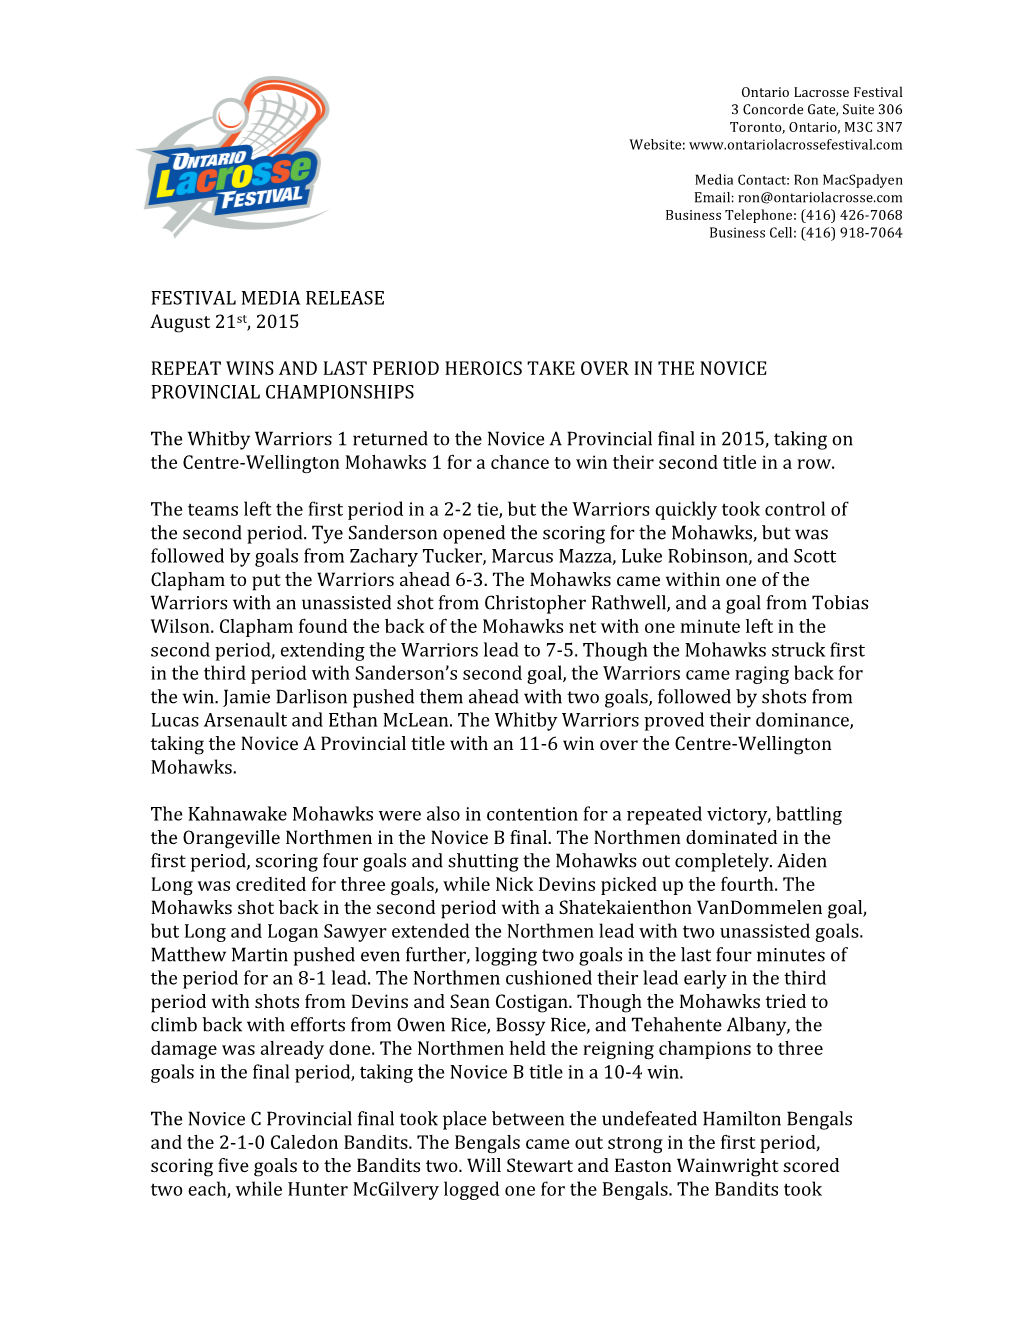 FESTIVAL MEDIA RELEASE August 21St, 2015 REPEAT WINS AND